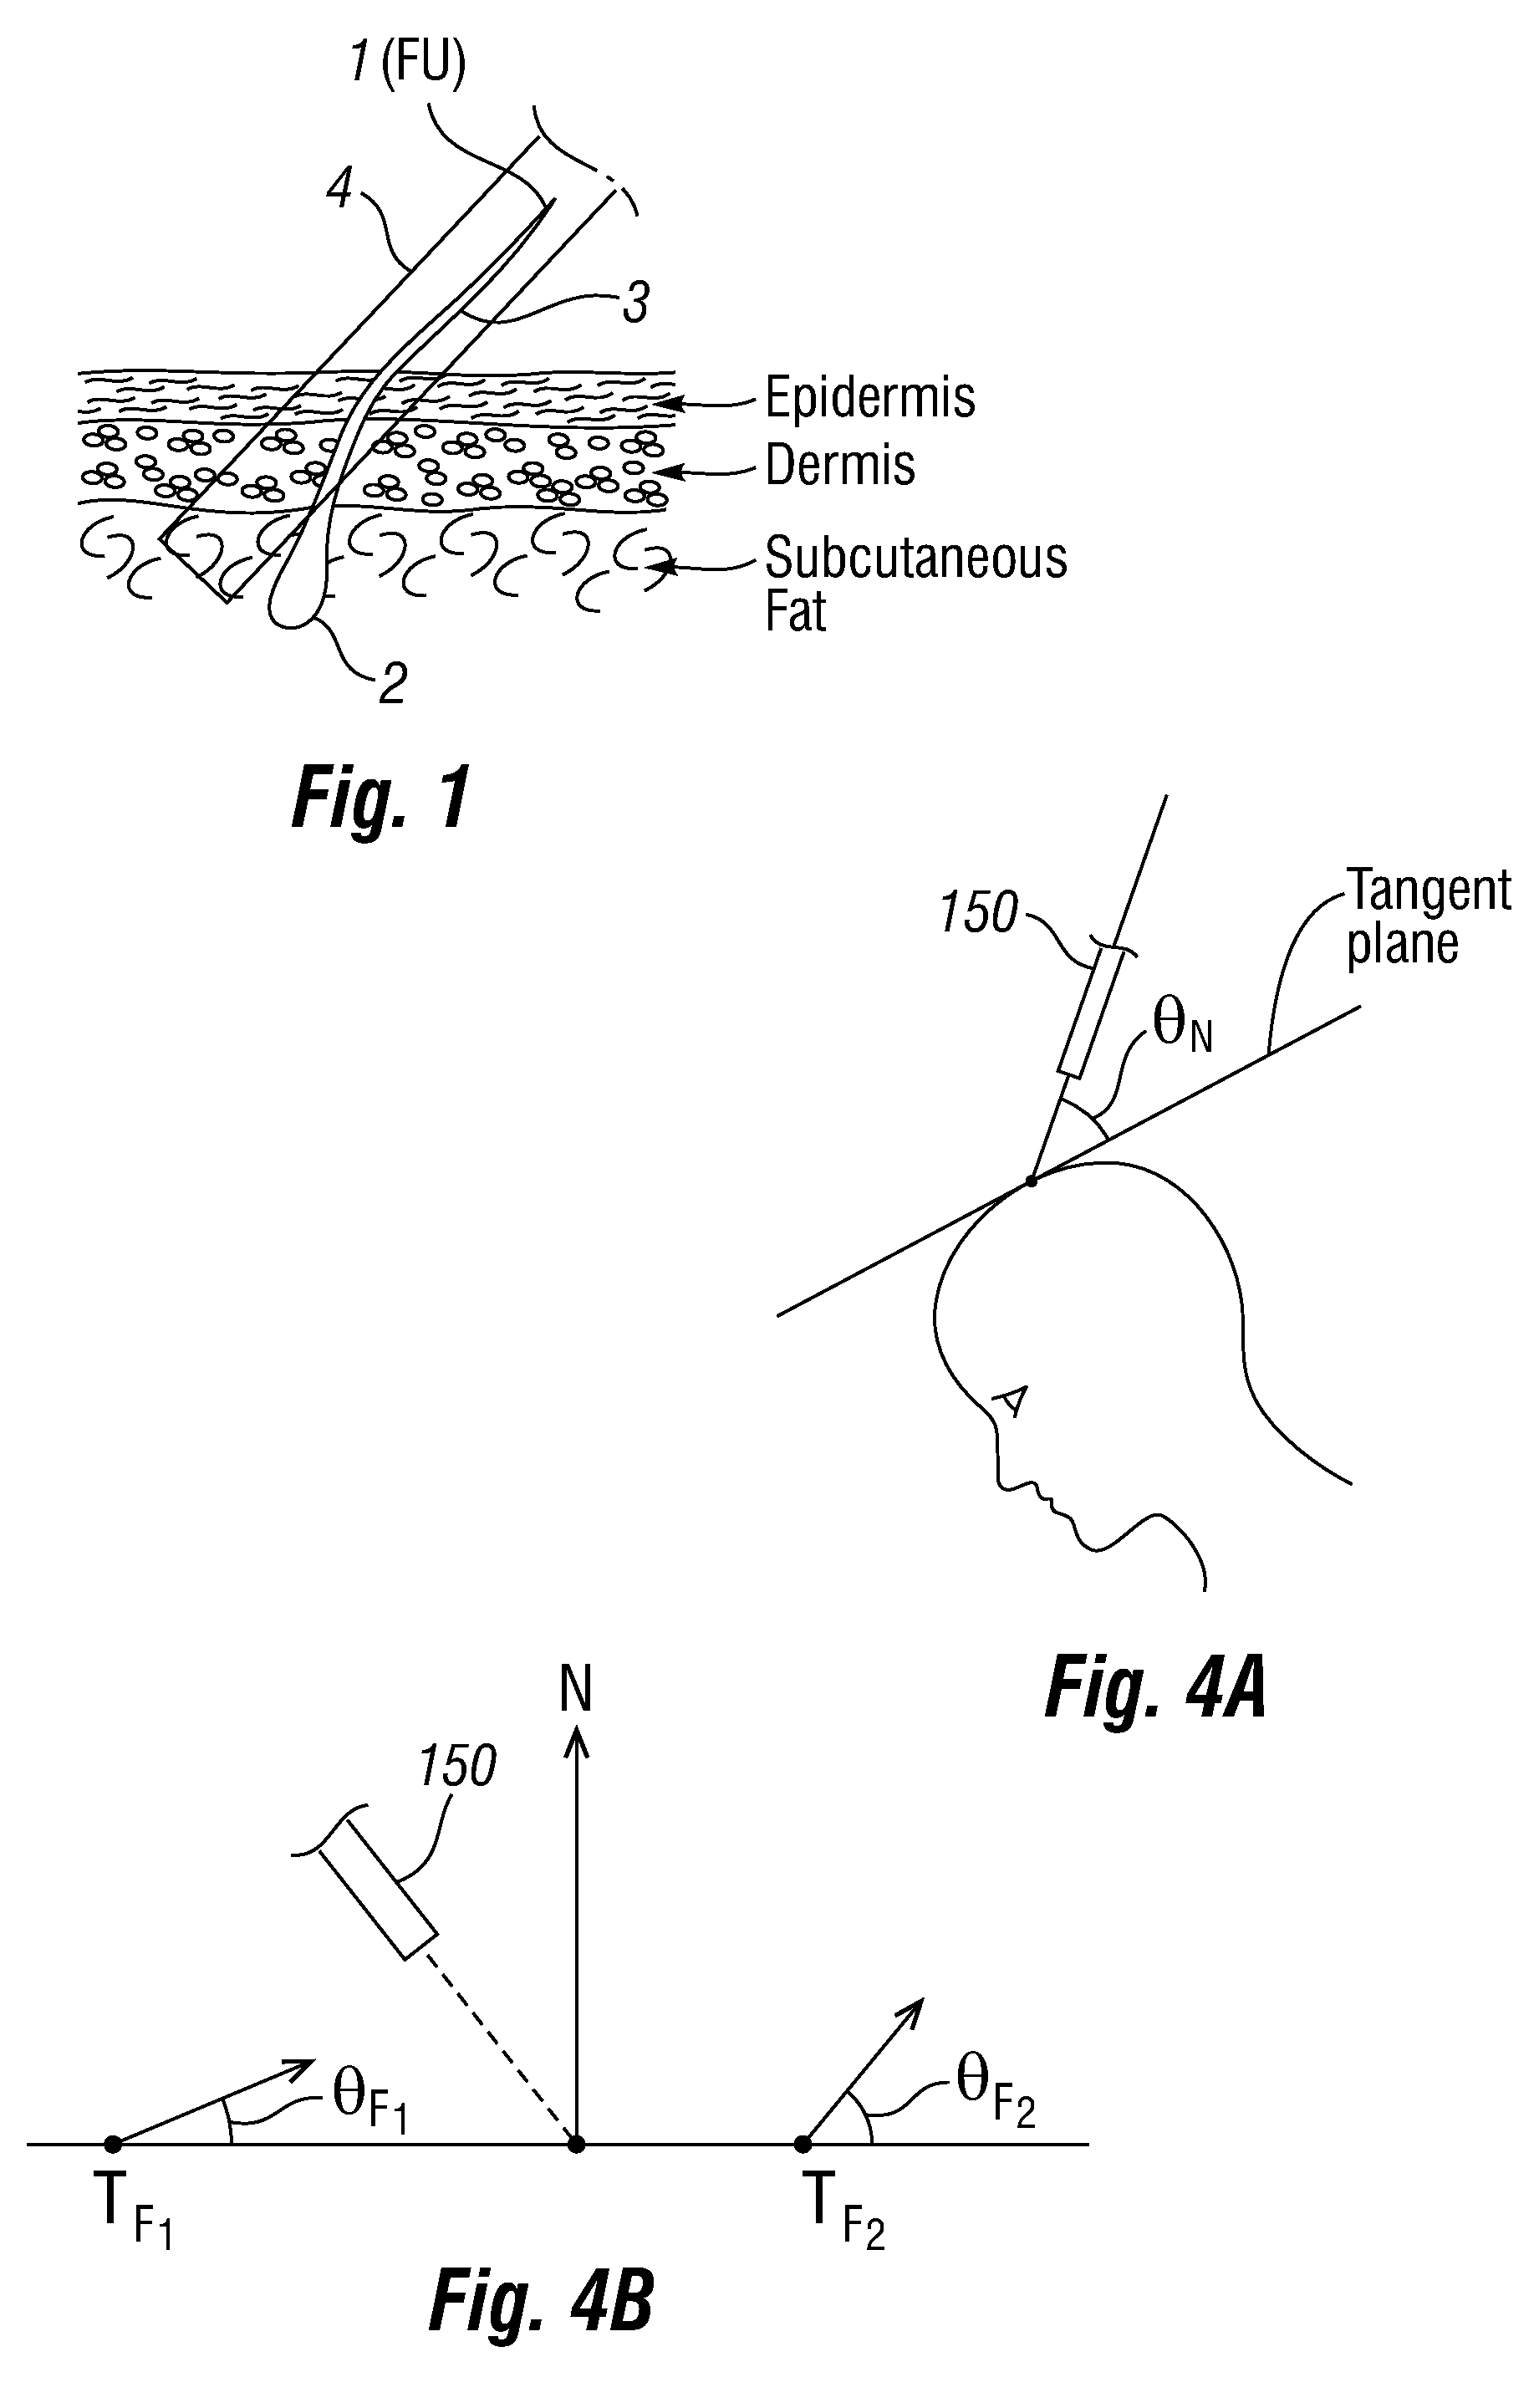 System and method for harvesting and implanting hair using image-generated topological skin models